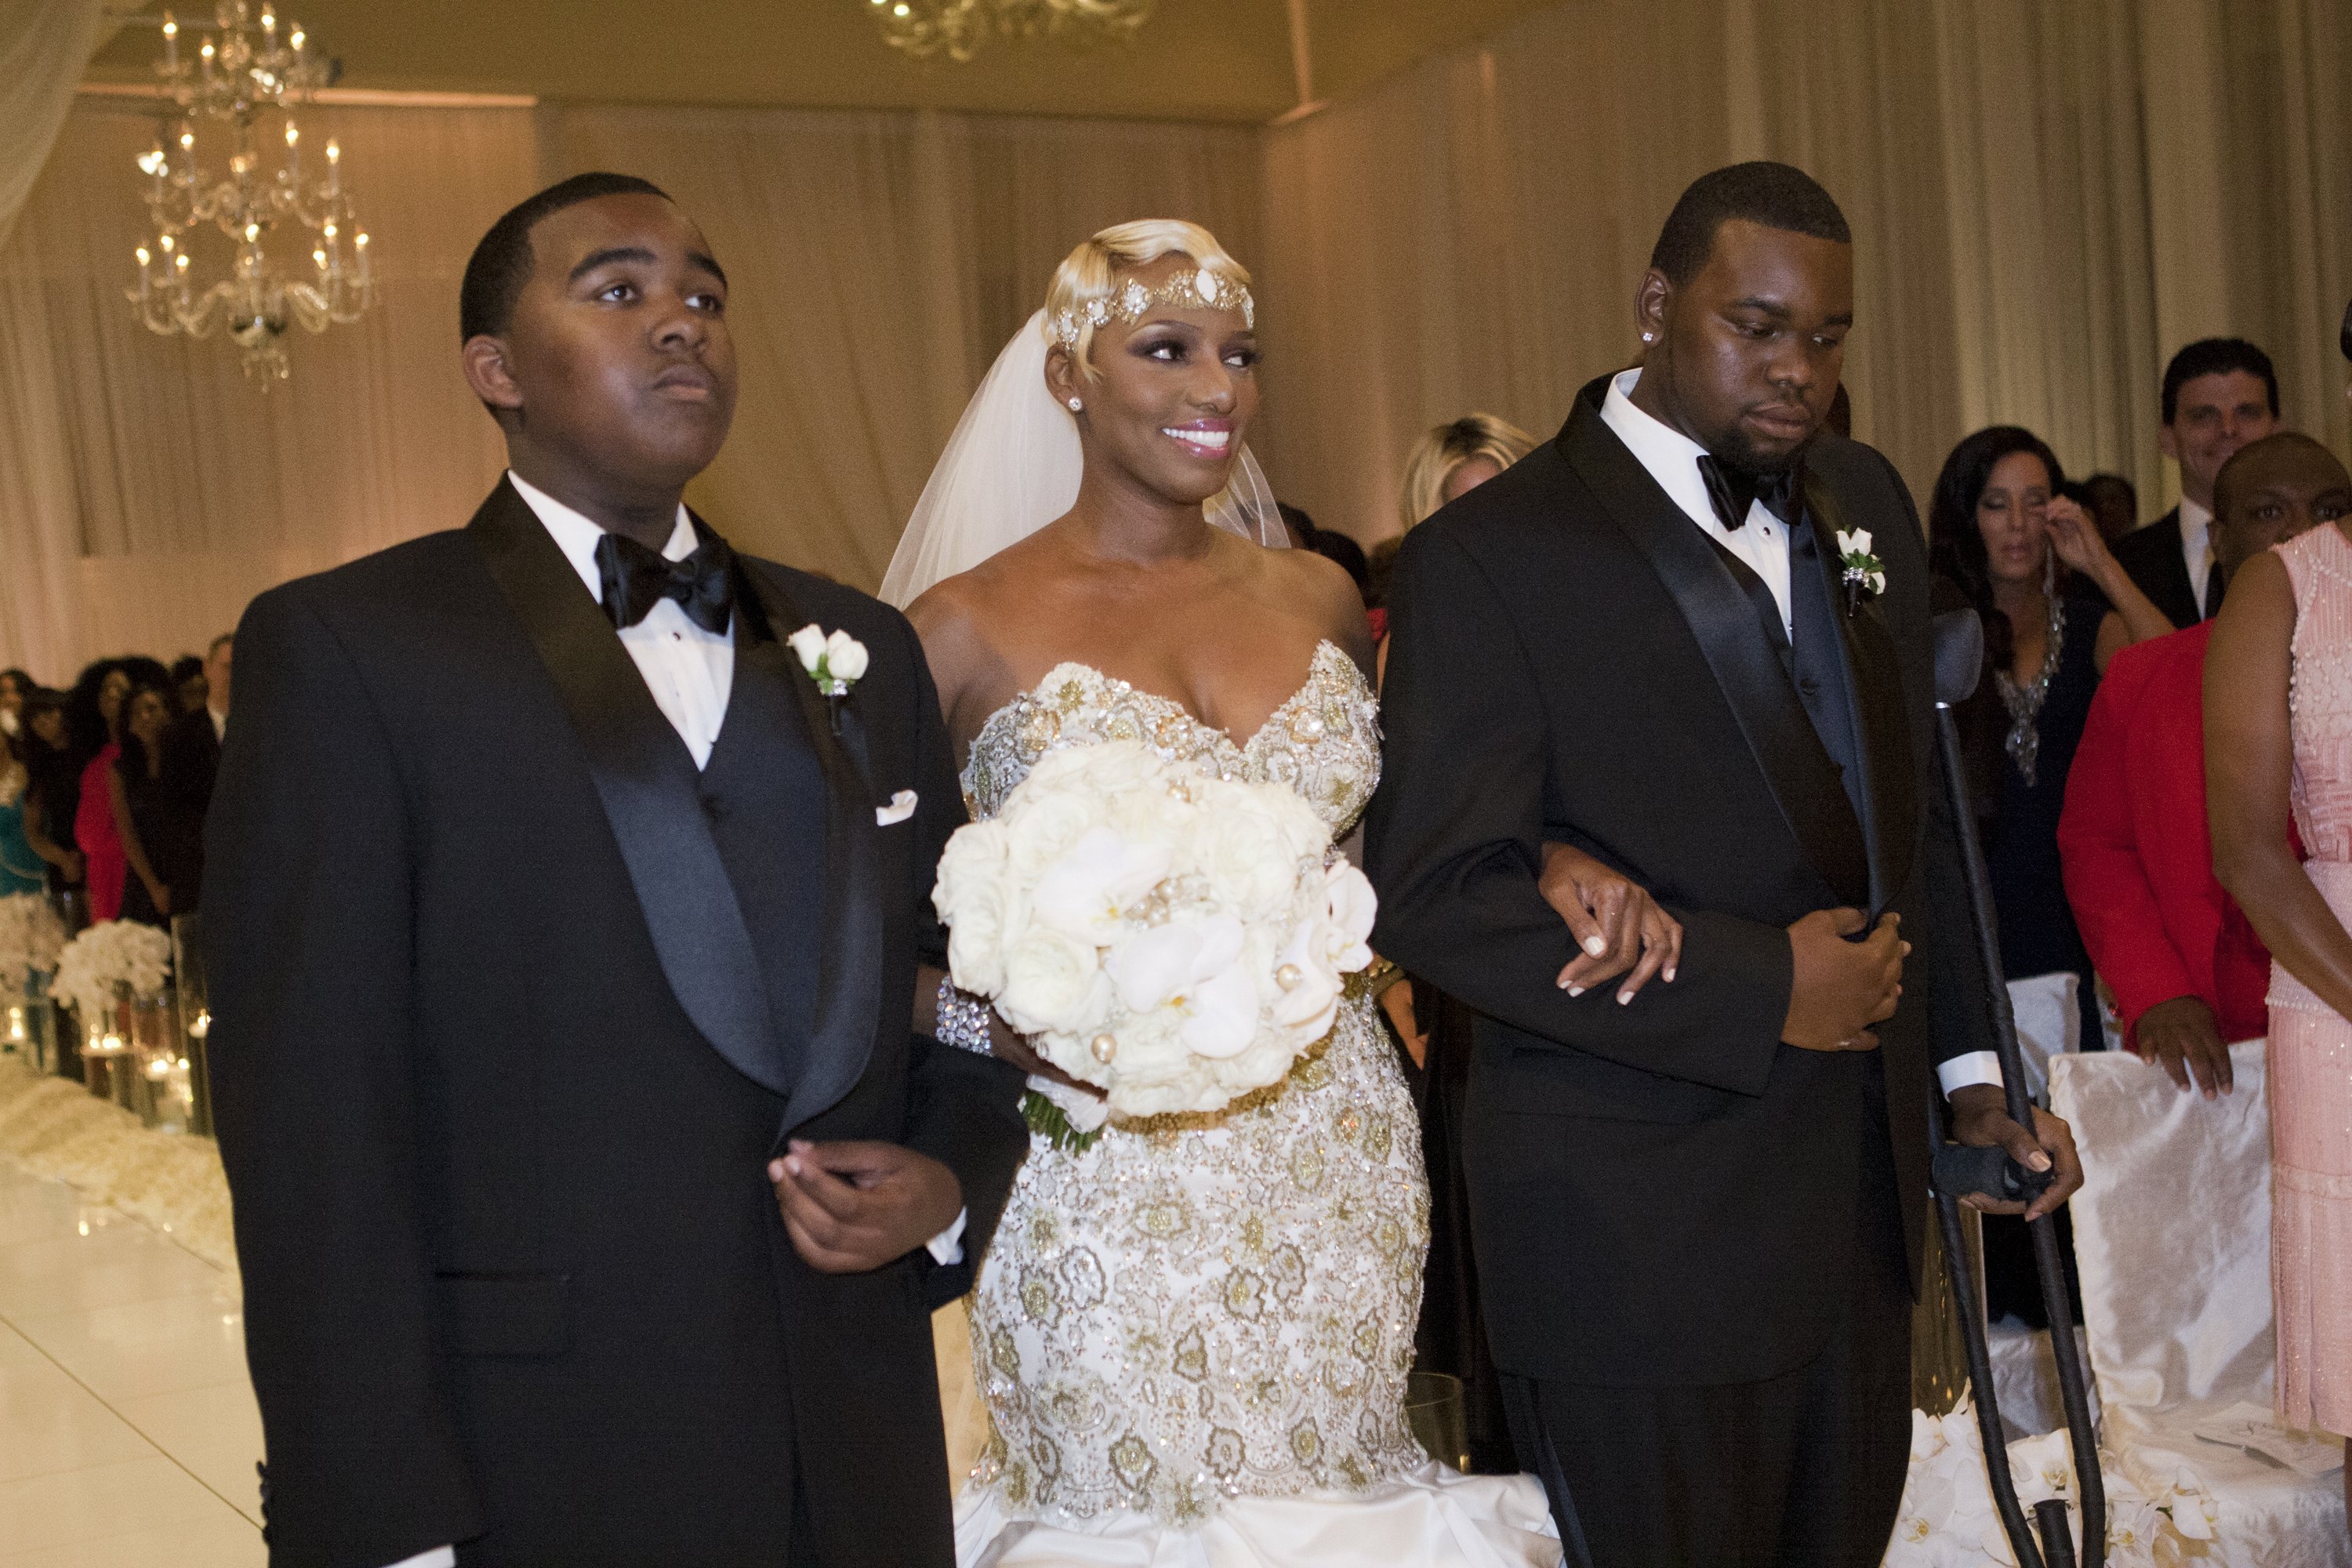 Brentt Leakes, Nene Leakes, and Bryson Bryant at Nene's vow renewal ceremony| Photo: Getty Images